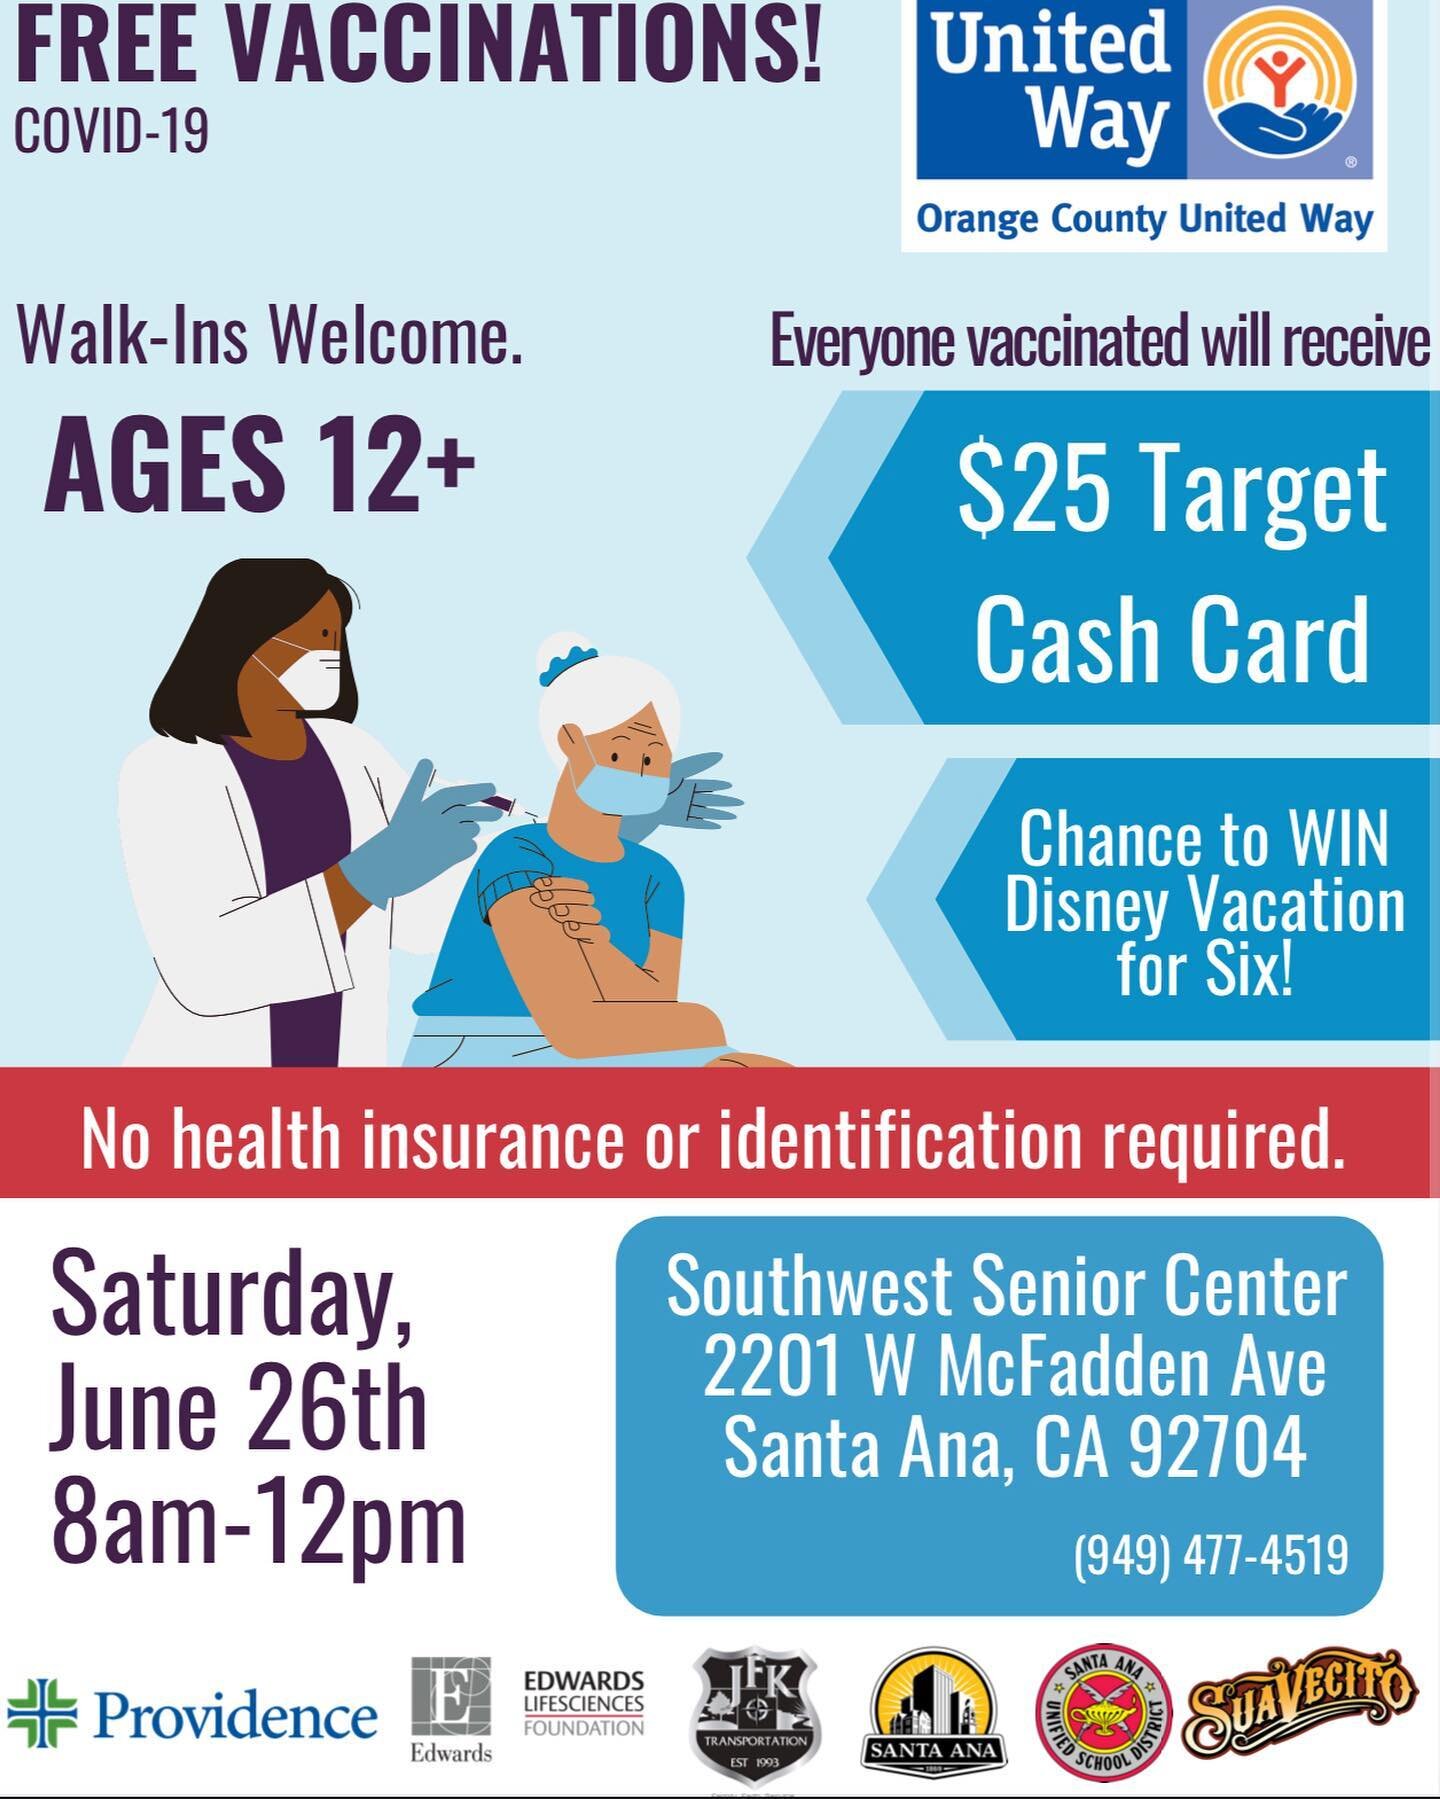 Looking for a place to get vaccinated? Southwest Senior Center will be offering vaccination on June 26th from 8:00AM-12:00PM. #TimeToEndThePandemic